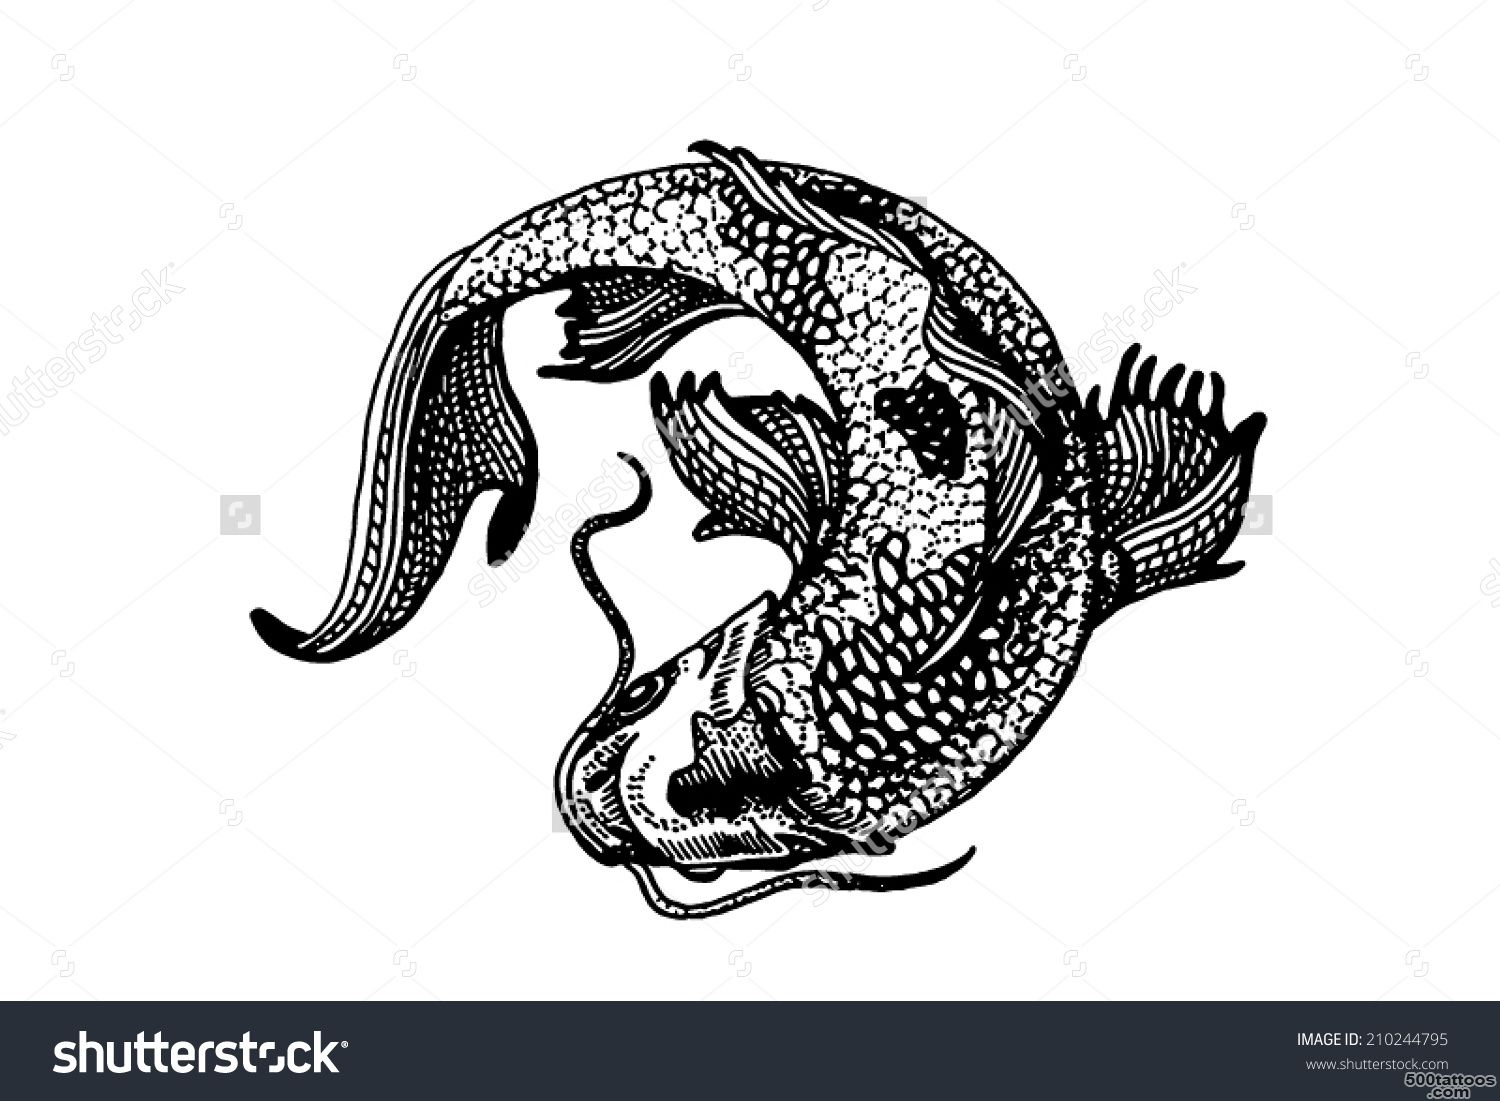 Tattoo Or Emblem Style Koi Fish Curled Stock Vector Illustration ..._28